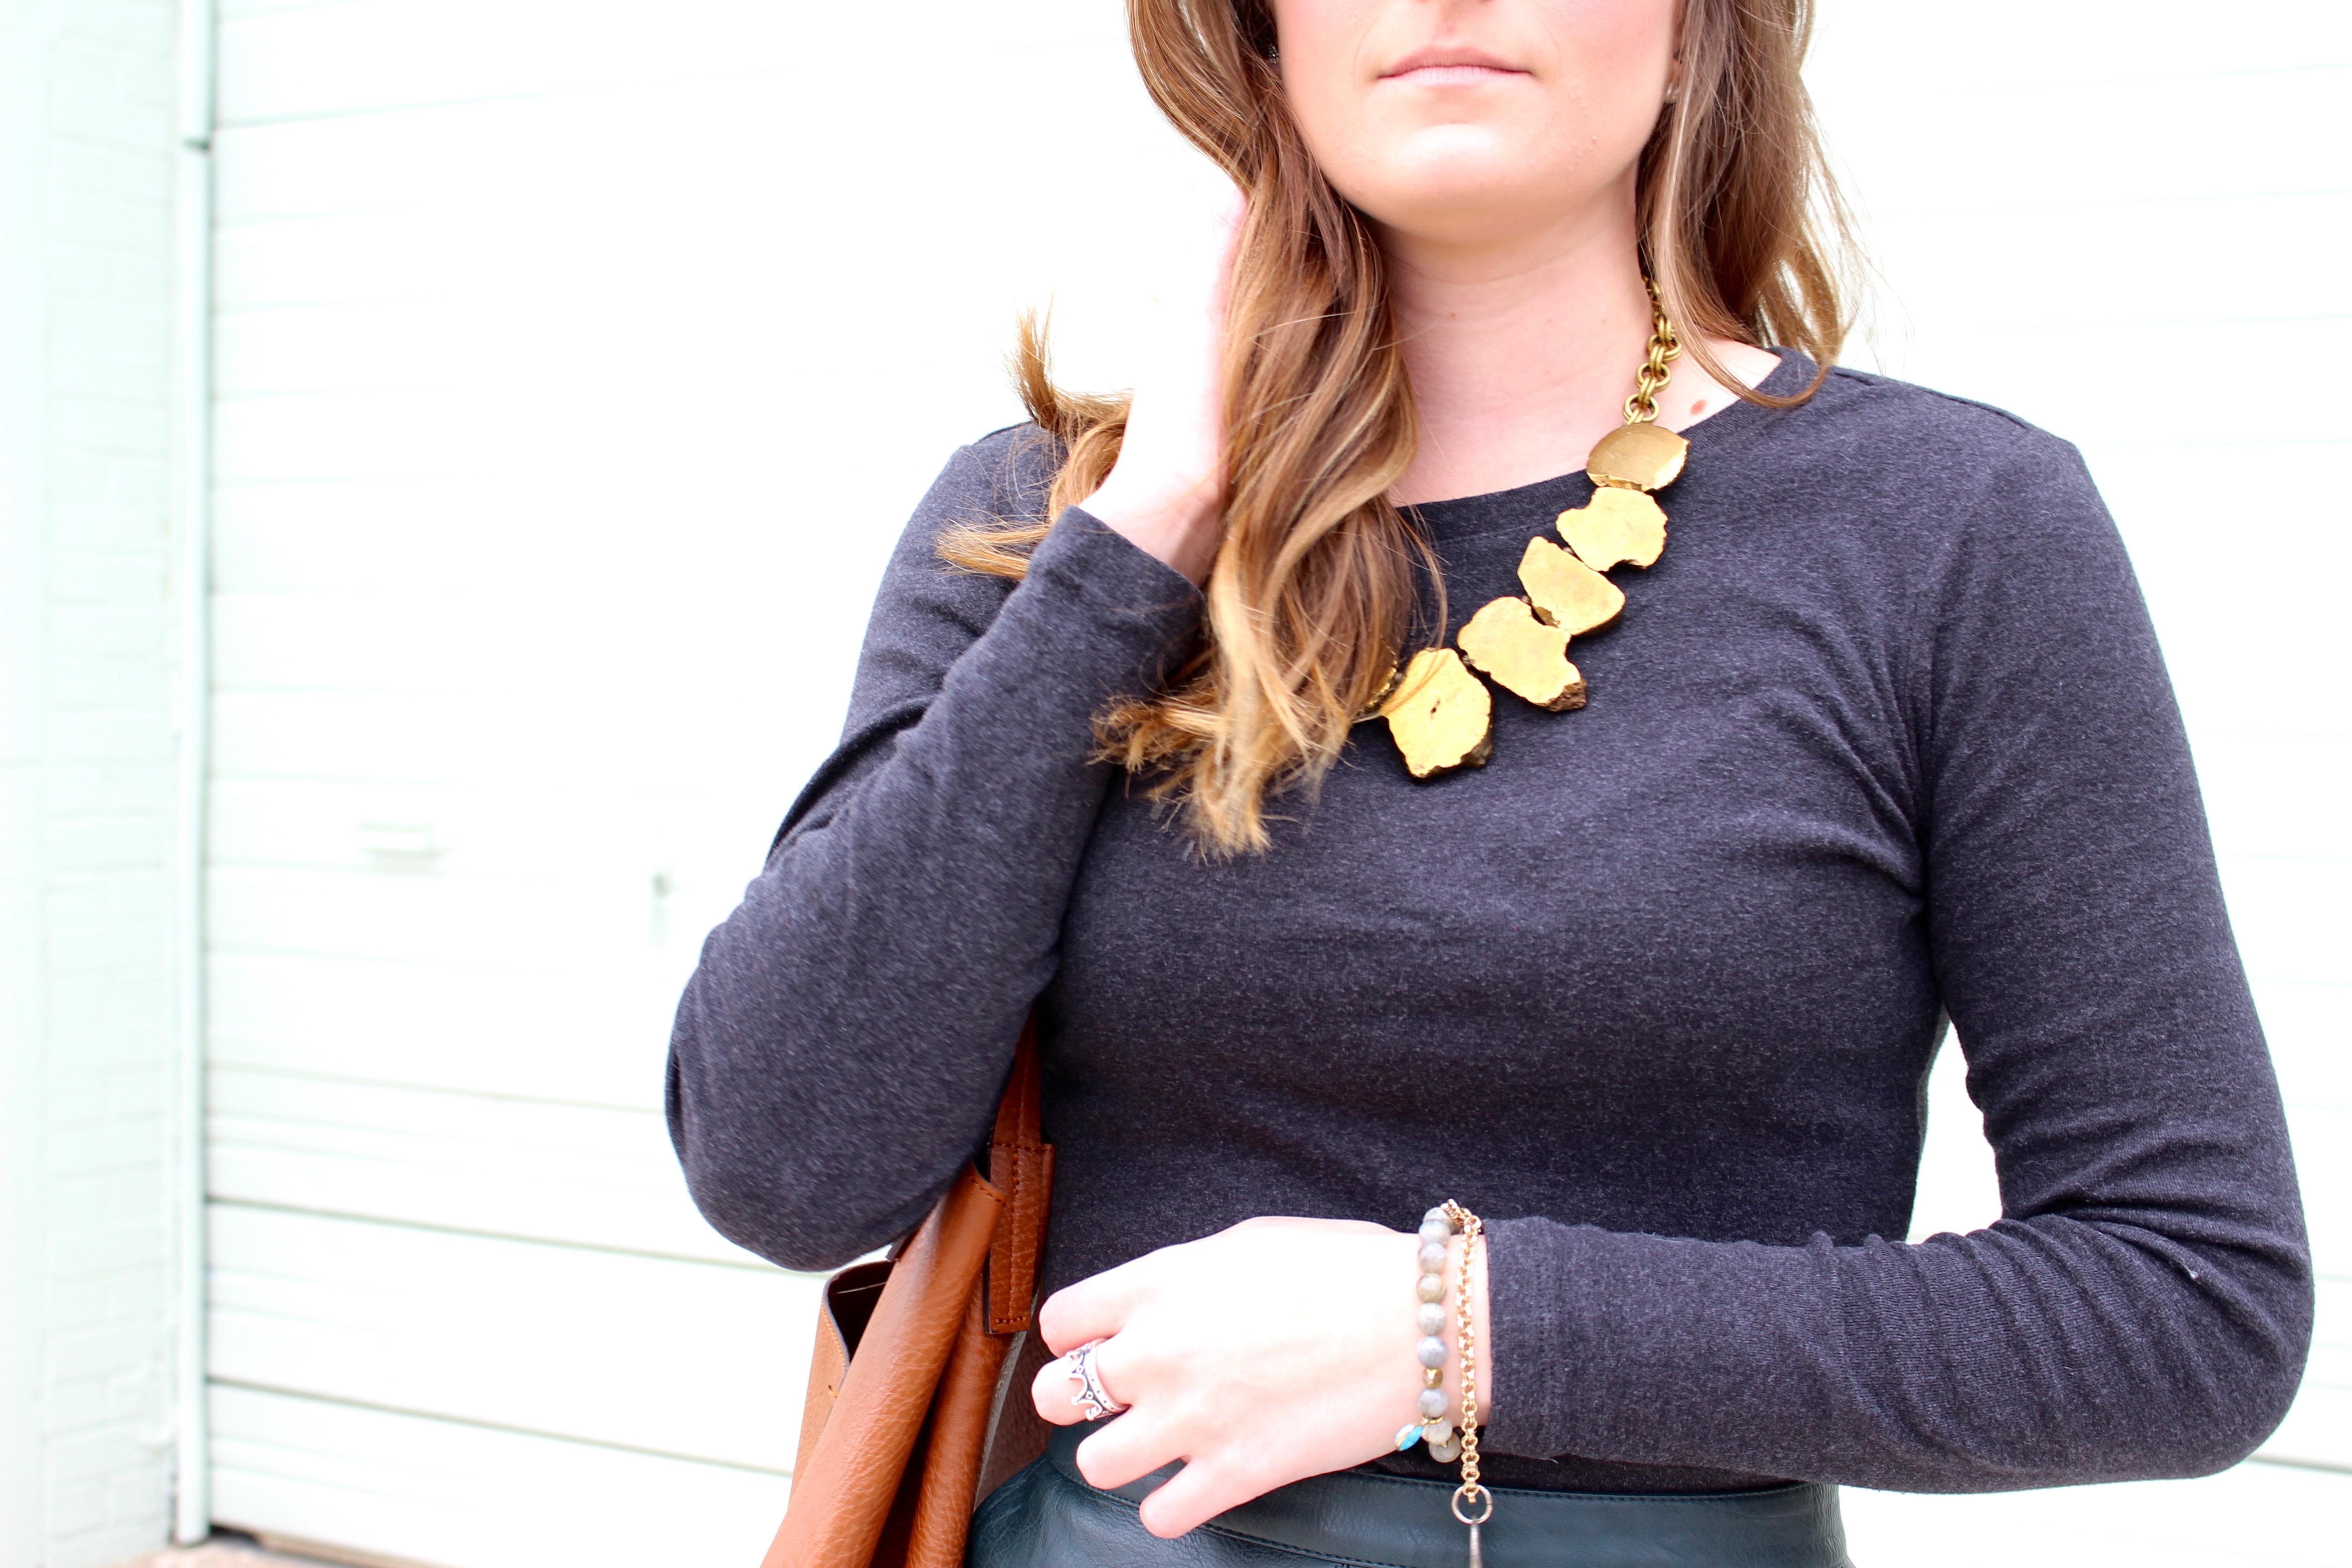 statement necklace and jewelry - Green Leather Skirt by popular Texas fashion blogger Audrey Madison Stowe